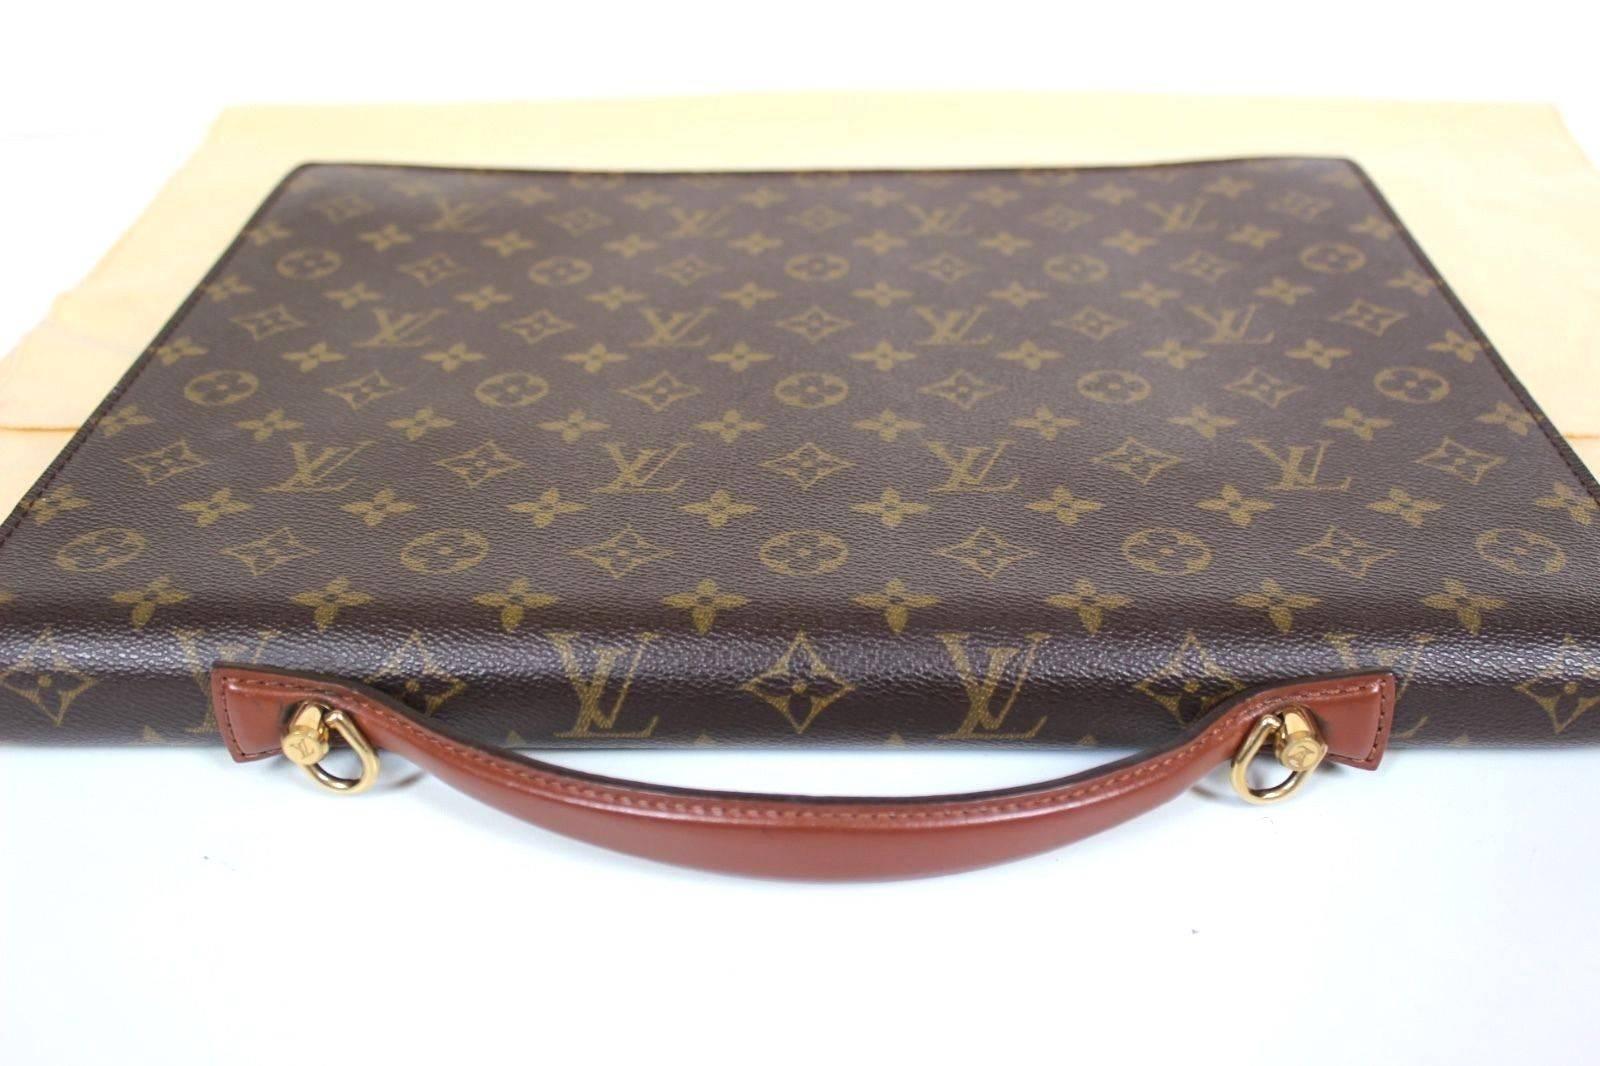 100% Authentic Louis Vuitton Monogram Monceau Briefcase Brown Satchel 
This briefcase from Louis Vuitton in very Good condition, a front flap closure, a monogram print, a flat top handle, and a zip fastened interior compartment. 
Comes with